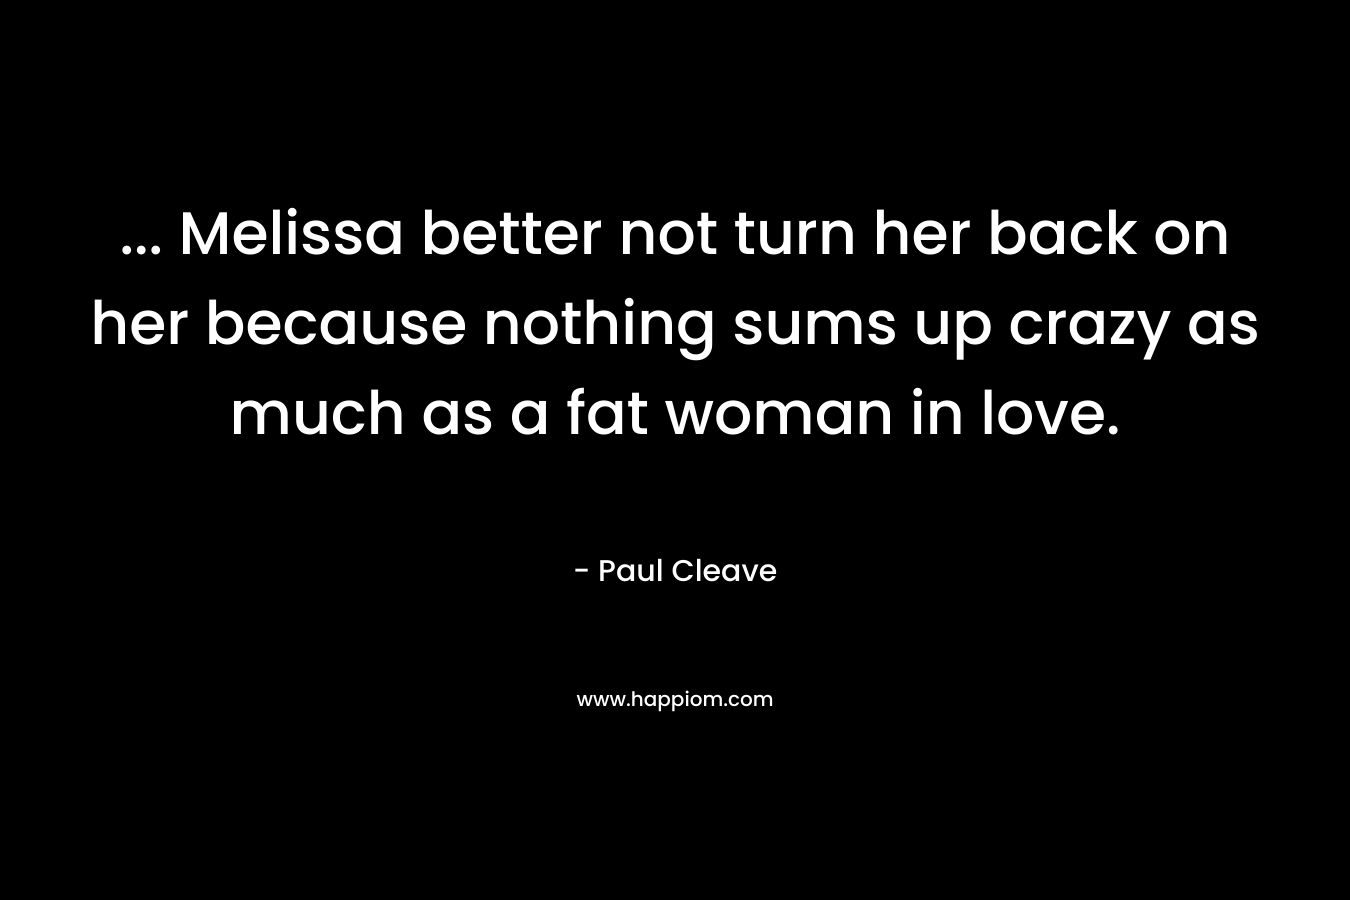 … Melissa better not turn her back on her because nothing sums up crazy as much as a fat woman in love. – Paul Cleave